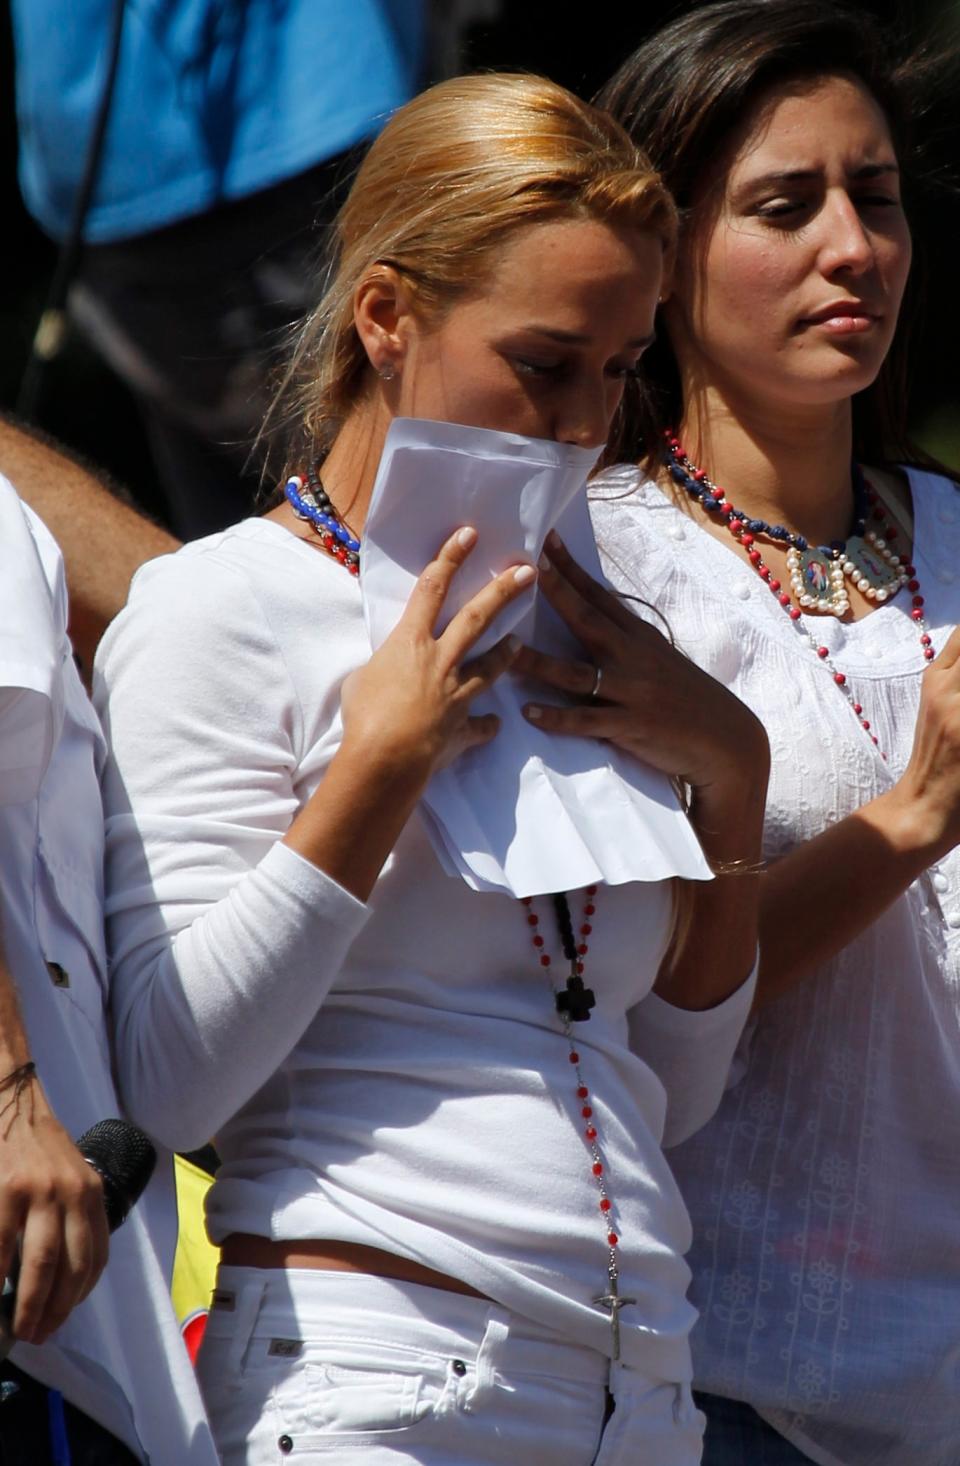 Lilian Tintori, wife of opposition leader Leopoldo Lopez, kisses a letter penned from jail by her husband, after reading it to supporters at an anti-government protest in Caracas, Venezuela, Saturday, March 22, 2014. The letter calls on the embattled Venezuelan President Nicolas Maduro to resign and open the door to national reconciliation. (AP Photo/Fernando Llano)